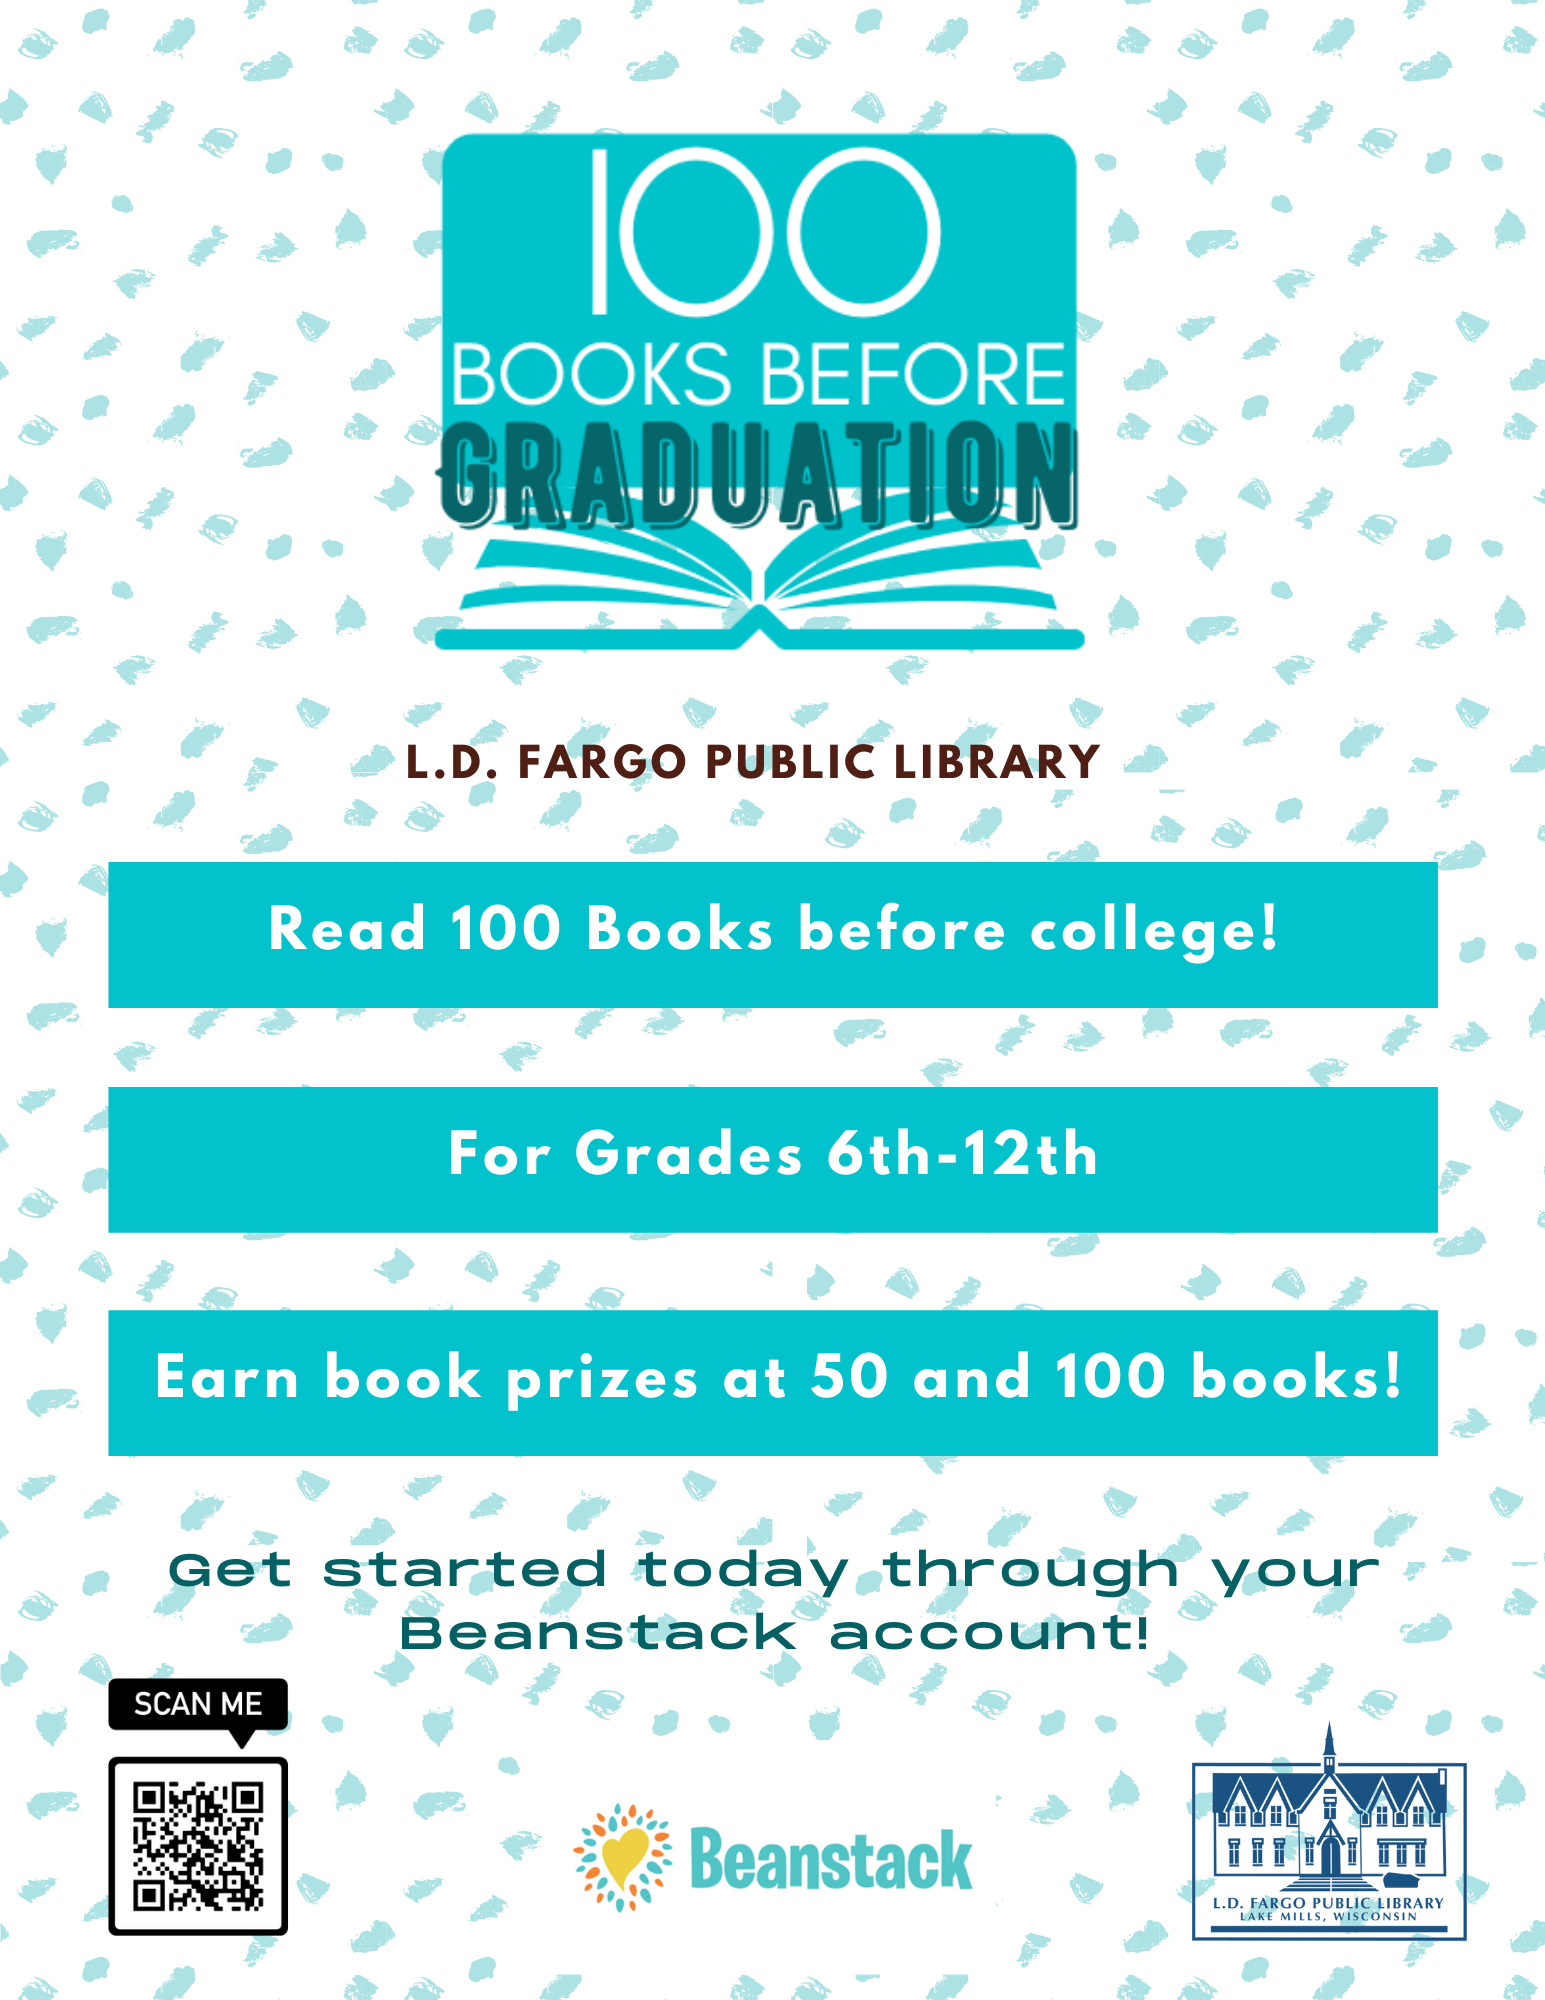 100 Books before Graduation. For Grades 6th-12th Earn book prizes at 50 and 100 books! Get started on beanstack today!